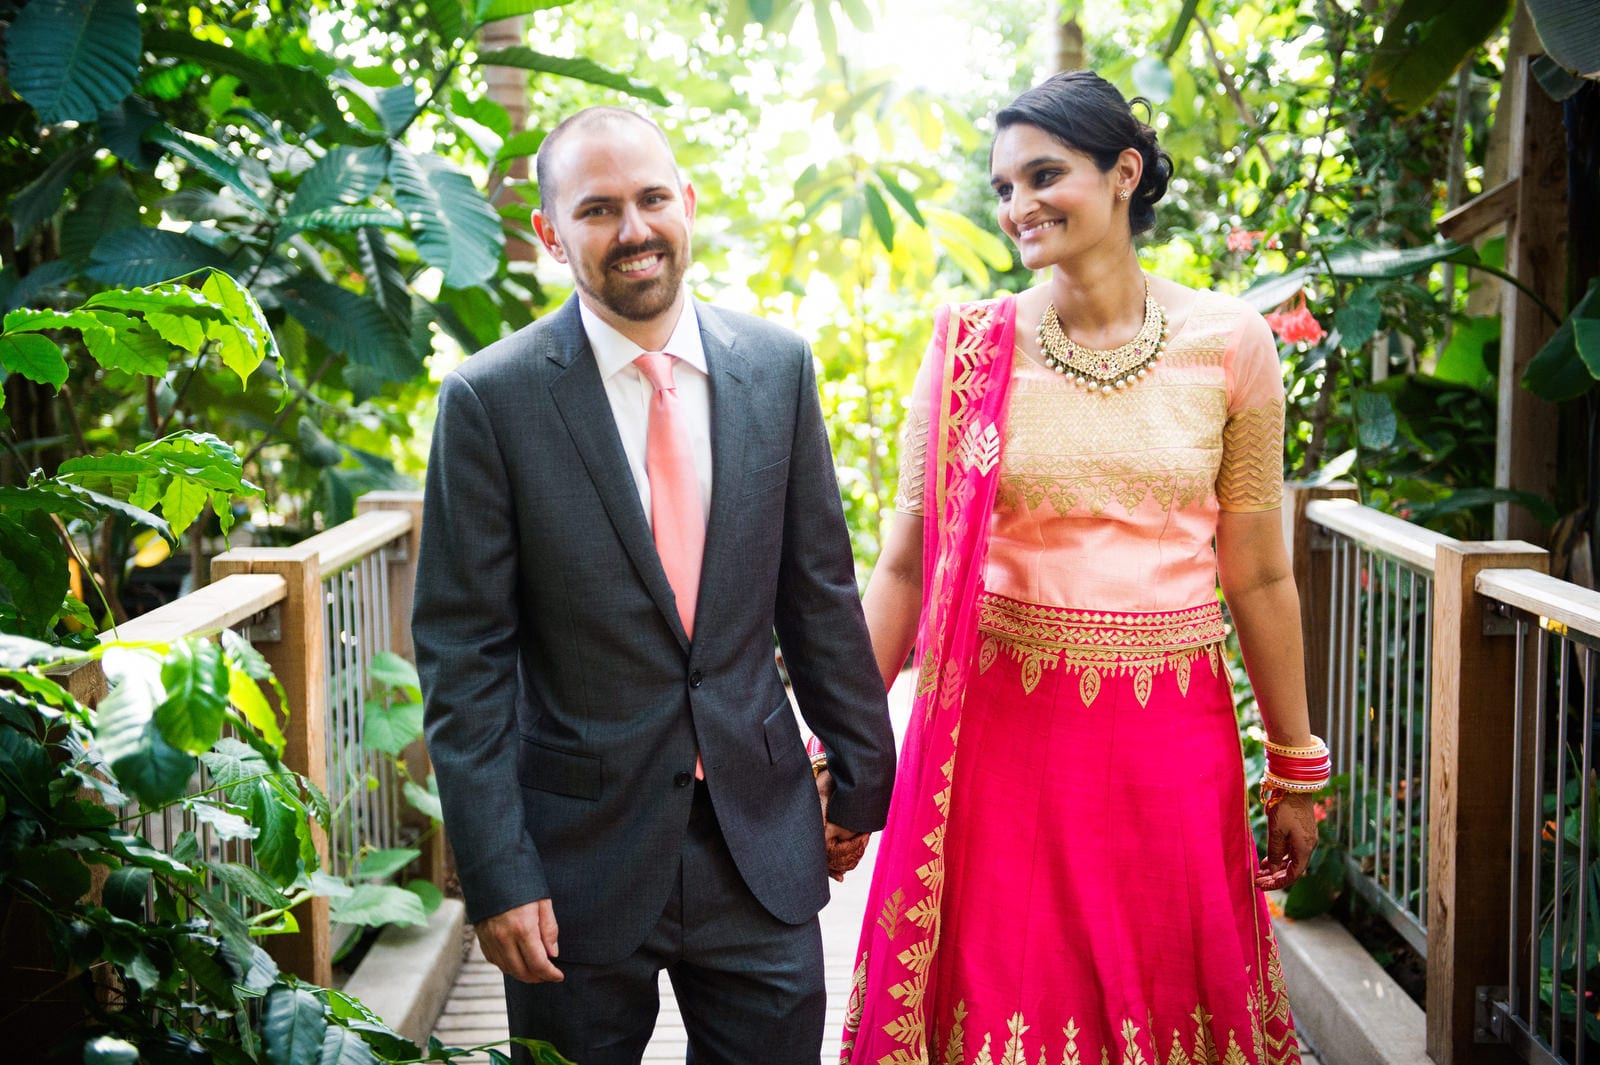 A bride and groom hold hands and smile as they stand in a greenhouse after their Renaissance Phipps South Asian Wedding.